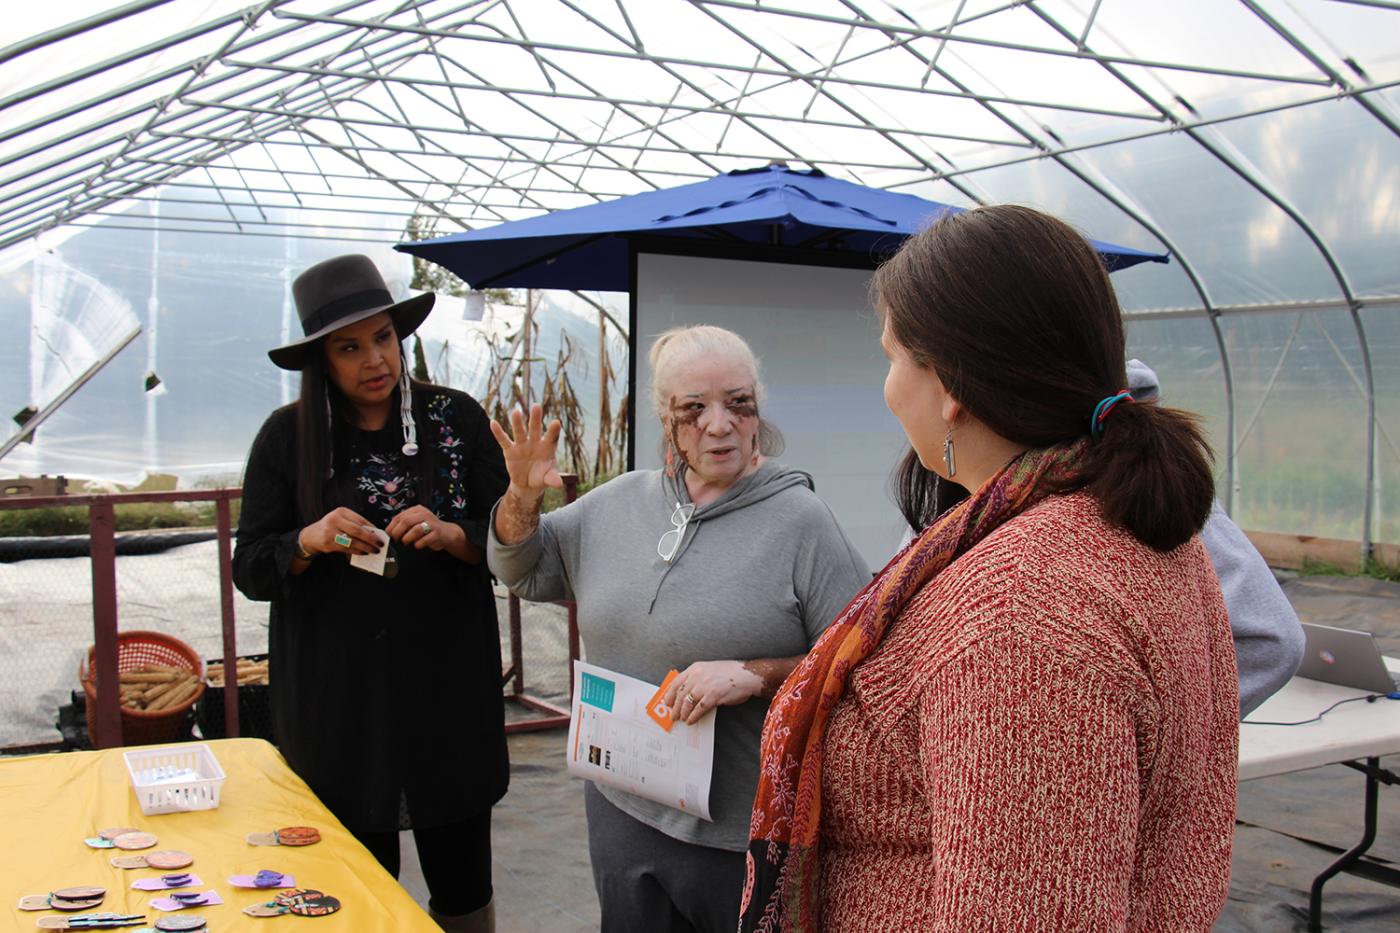 Endawnis Spears (Diné/Ojibwe/Choctaw/Chicksaw), Gail Rokotuibau (Narragansett/Pequot), Samantha Fry (Narragansett), and Morganna Becker connect and chat together at the Markets & Marketing workshop for Native American artists inside the high tunnel. Endawnis’ jewelry is displayed on a table in the foreground.